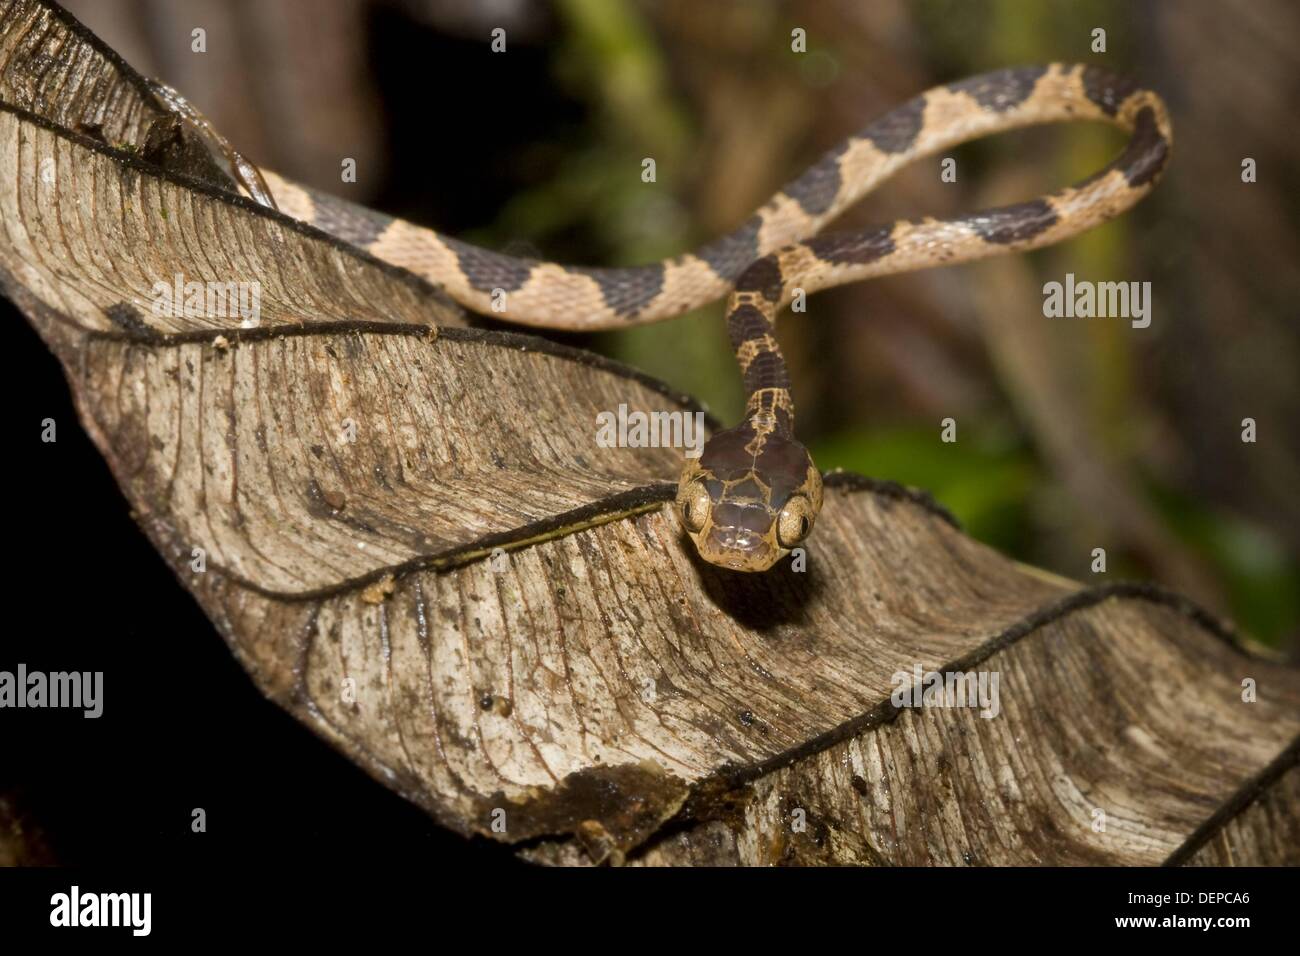 Colubrid snake, family Colubridae, foraging at night  Photographed in Panama Stock Photo